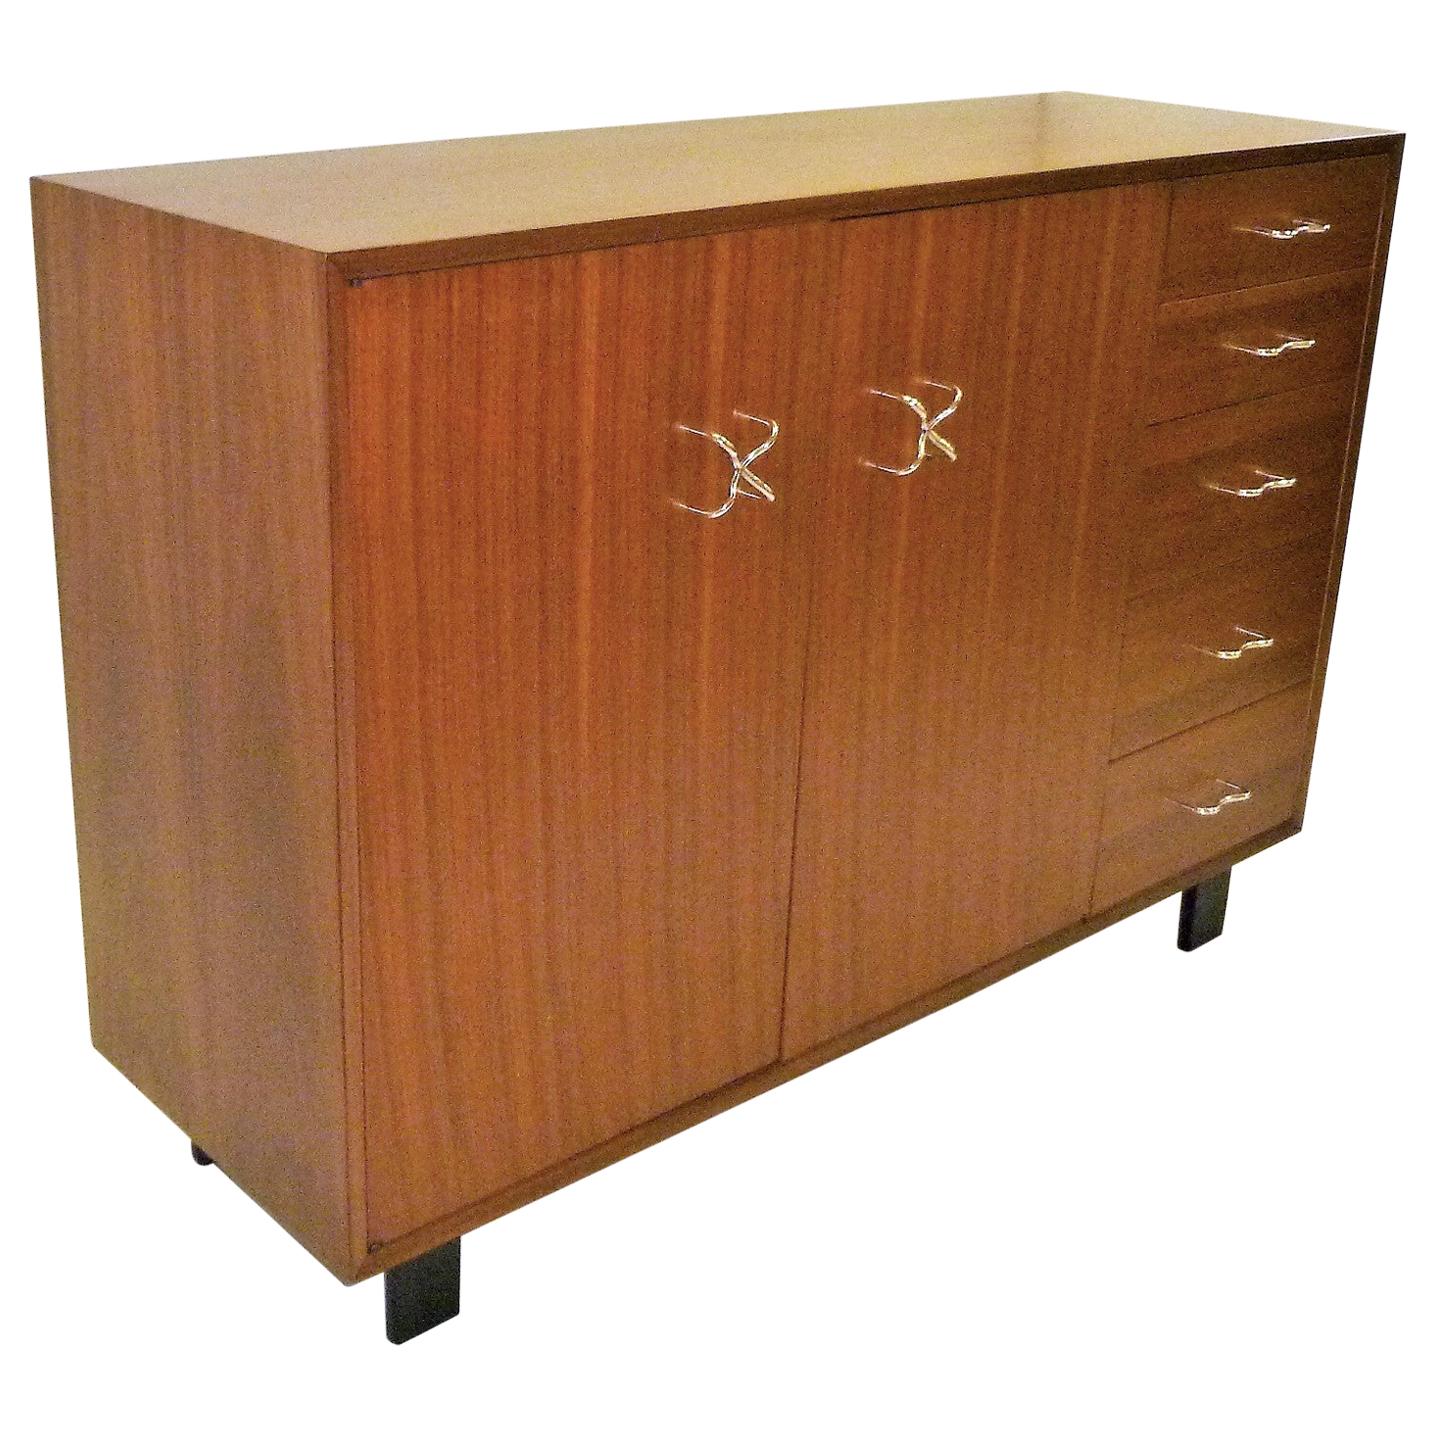 1950s George Nelson Credenza Buffet Sideboard for the Herman Miller Collection